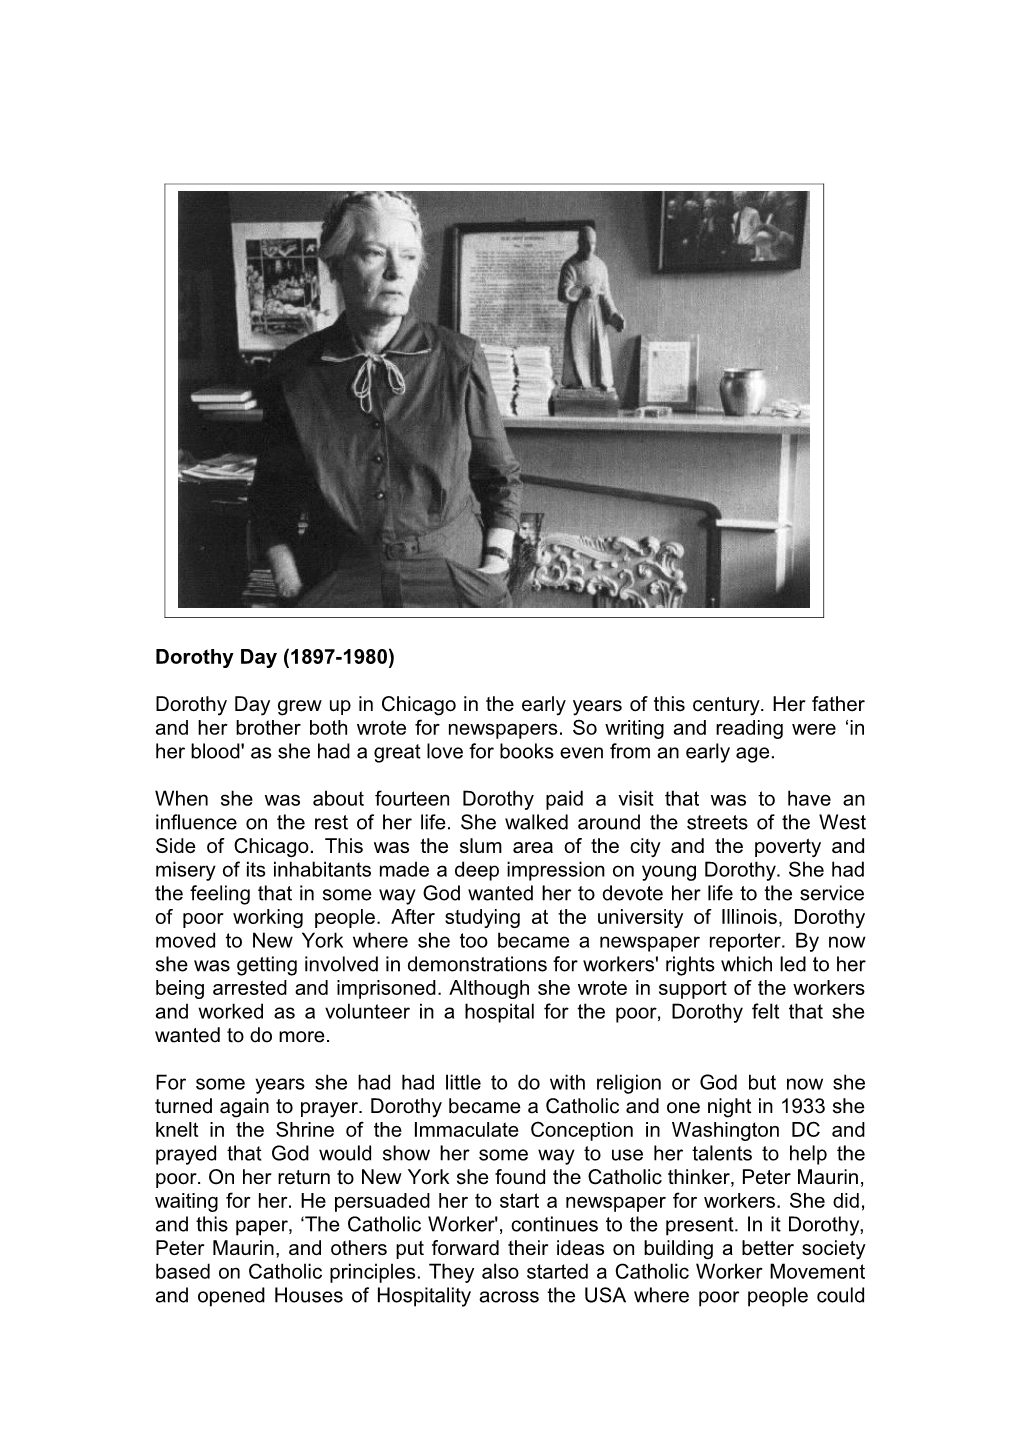 Dorothy Day Grew up in Chicago in the Early Years of This Century. Her Father and Her Brother